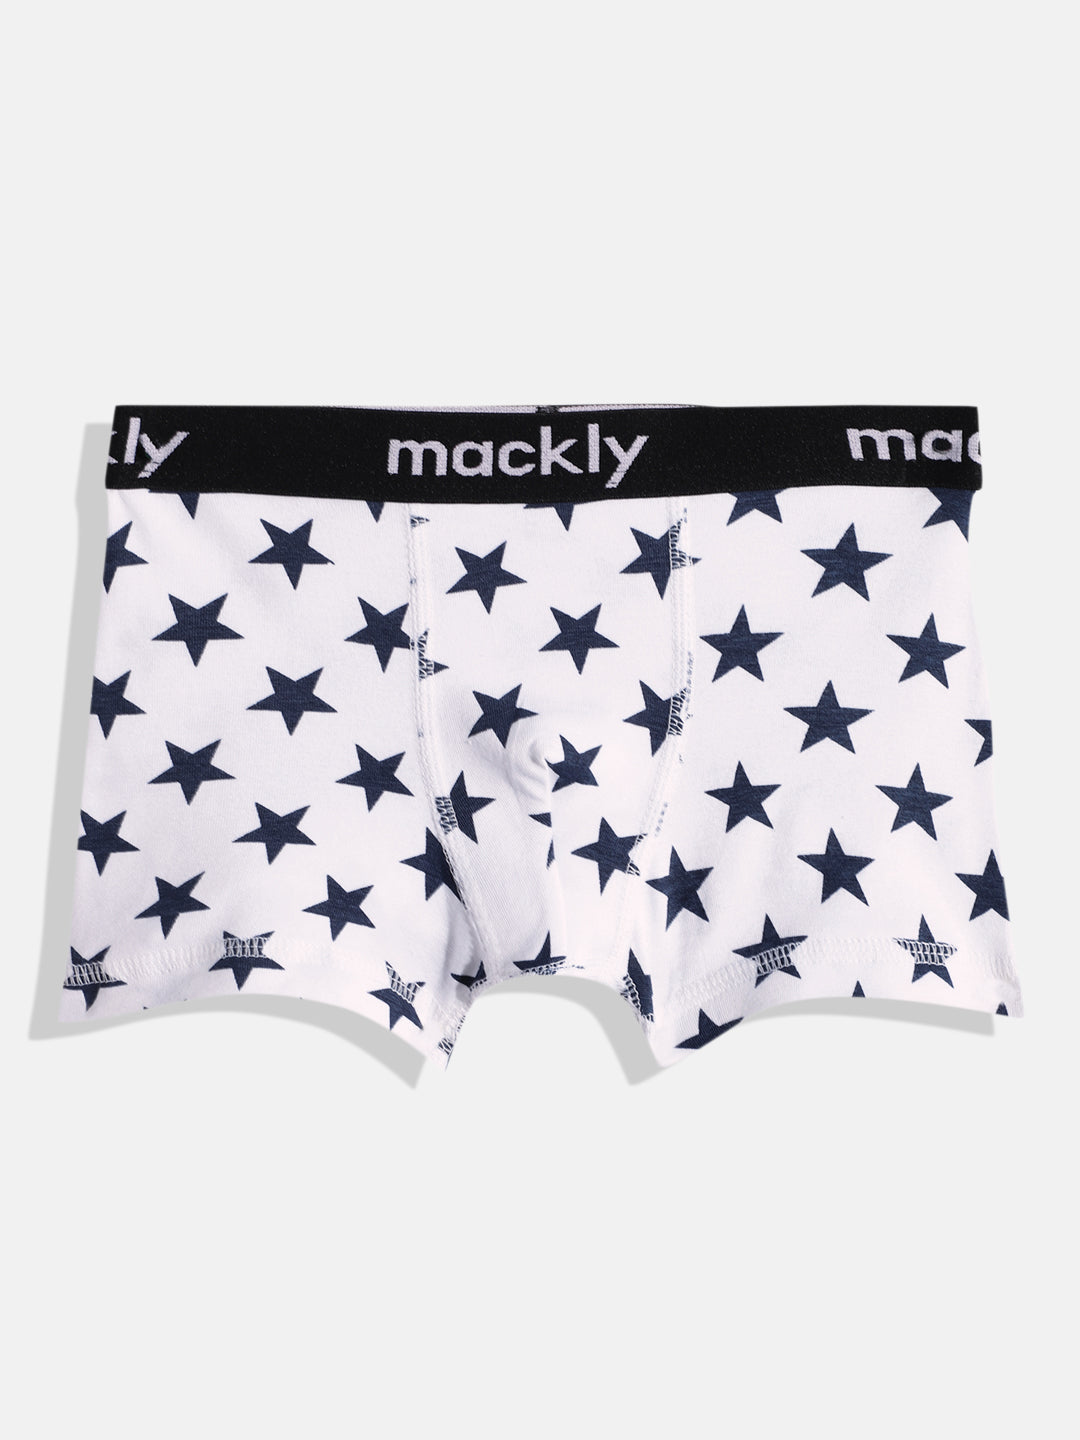 Boys Boxer - Pack of 3